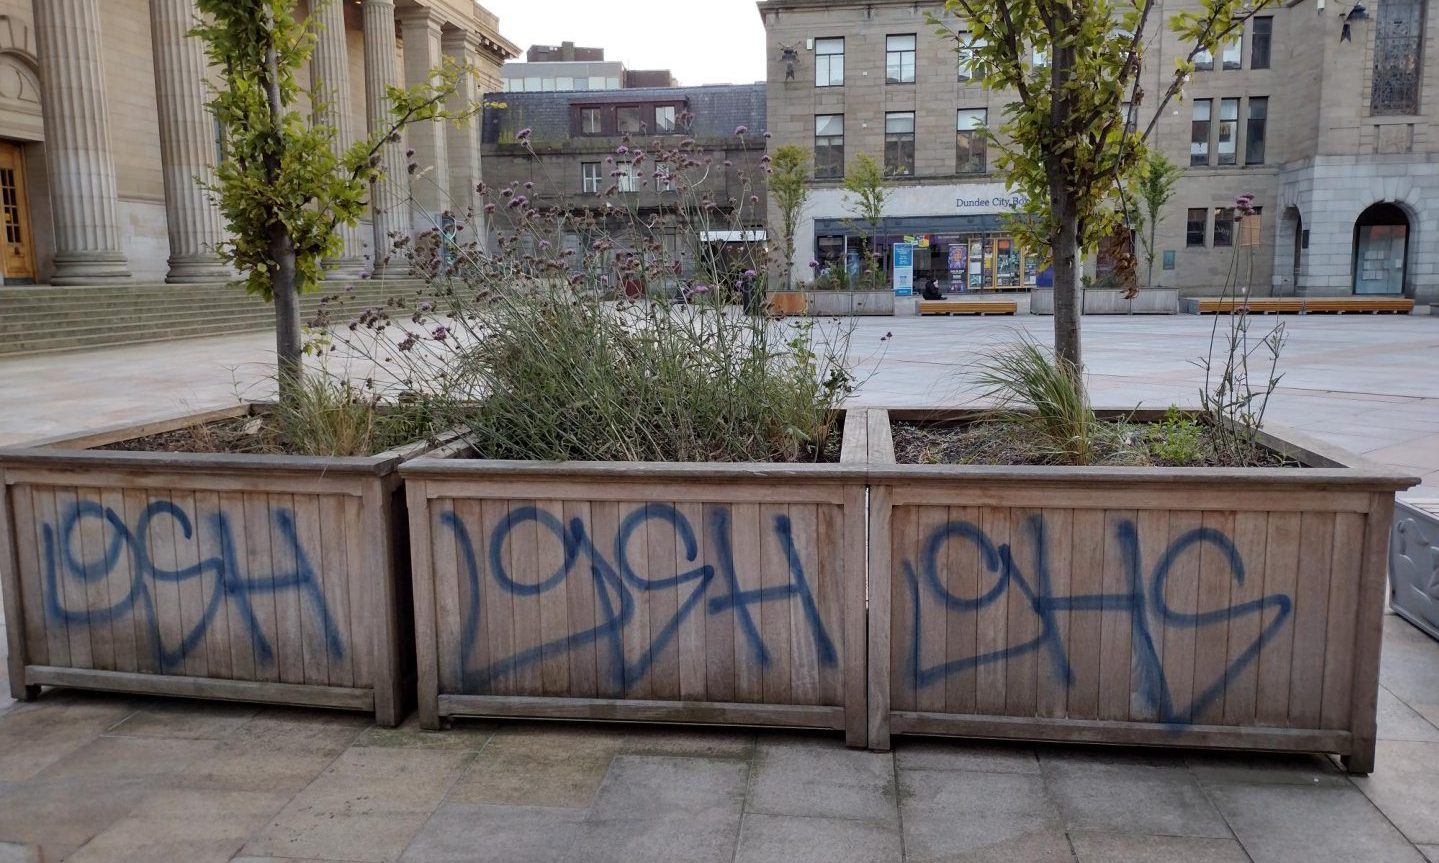 The planters in City Square have been targeted. Image: Craig Duncan.